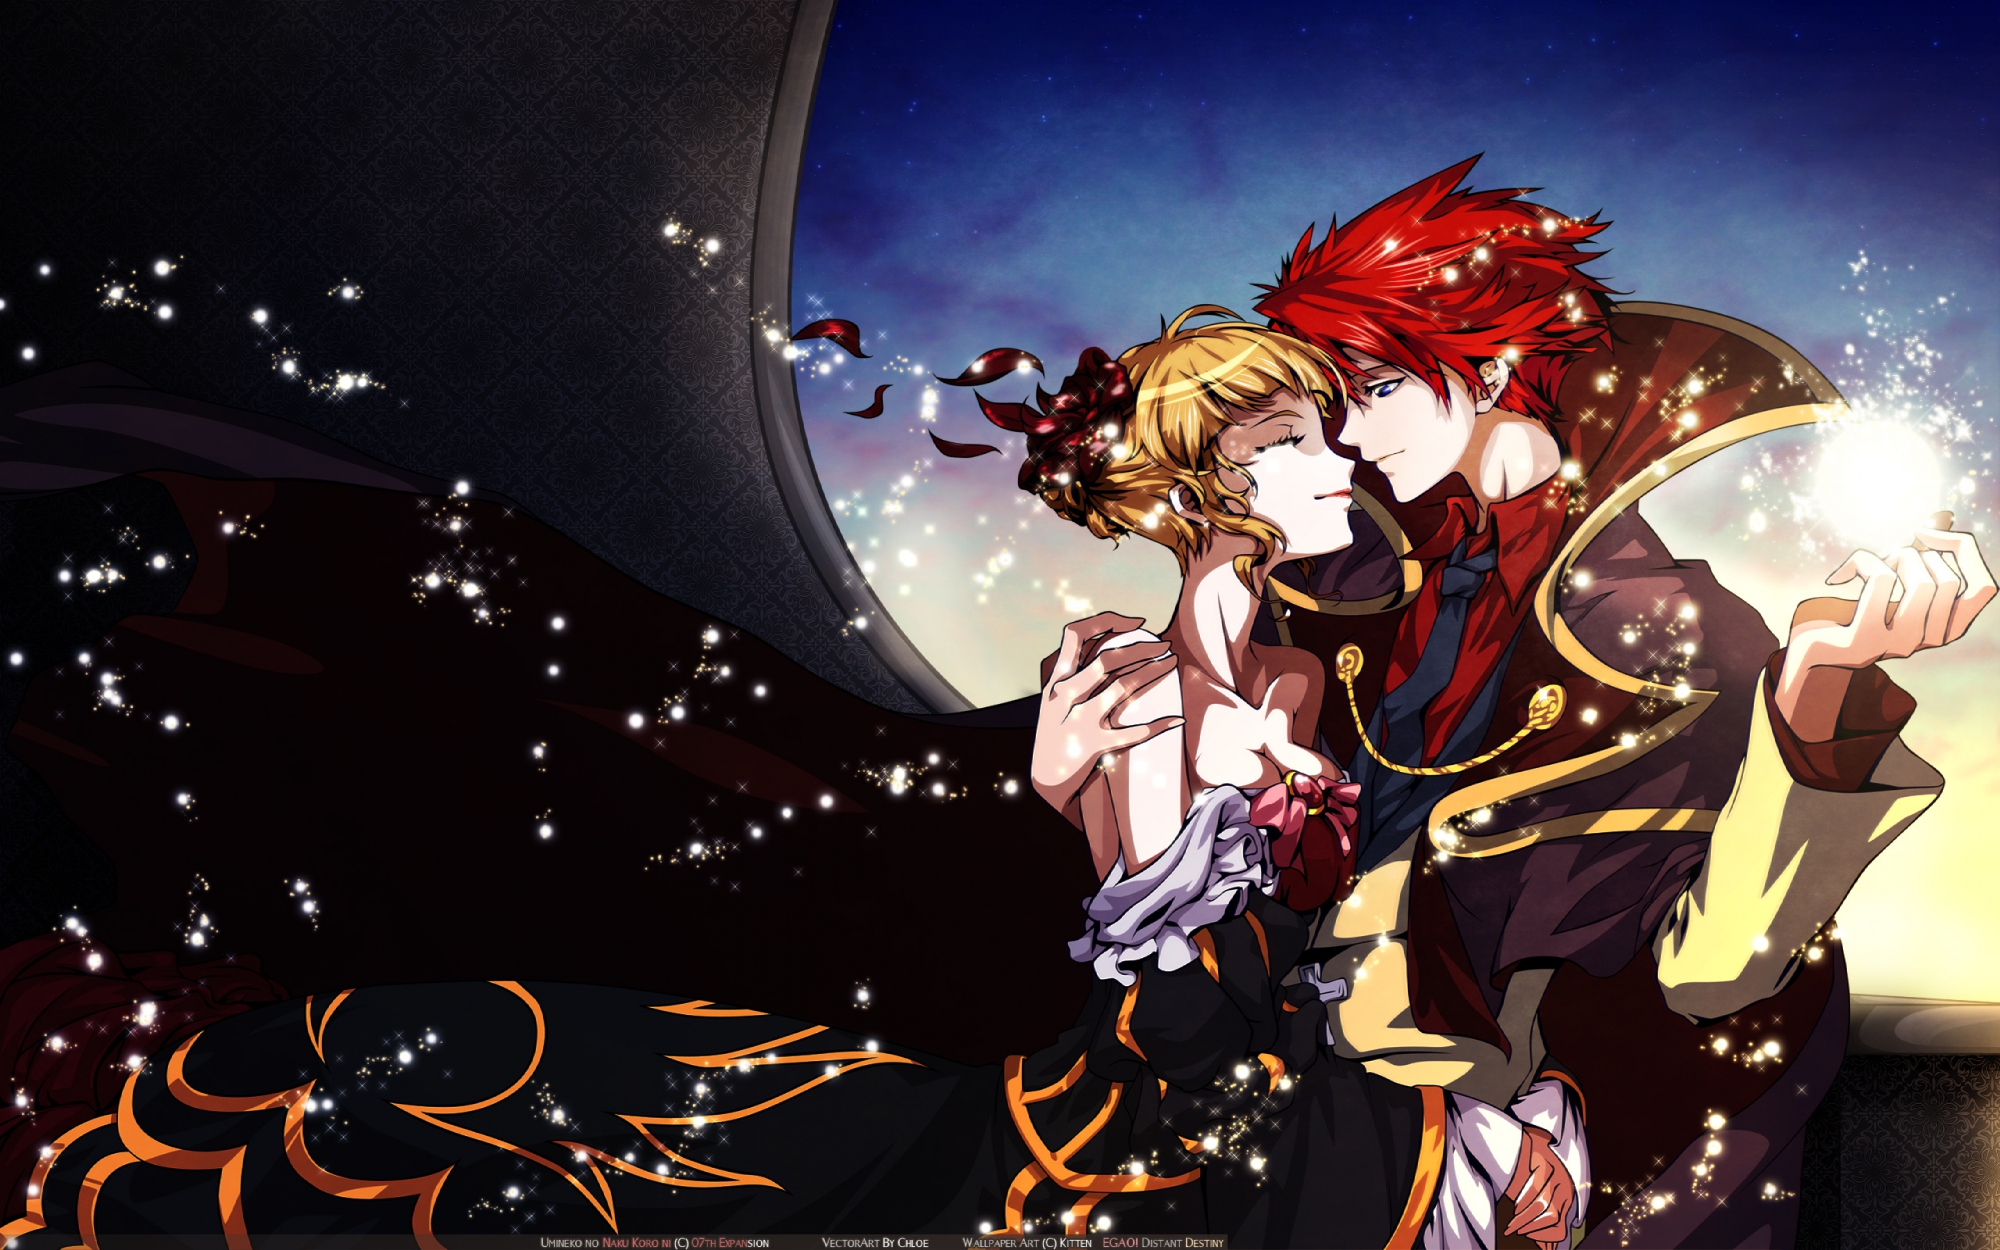 Beatrice and Battler, characters from Umineko: When They Cry, in a captivating anime scene.